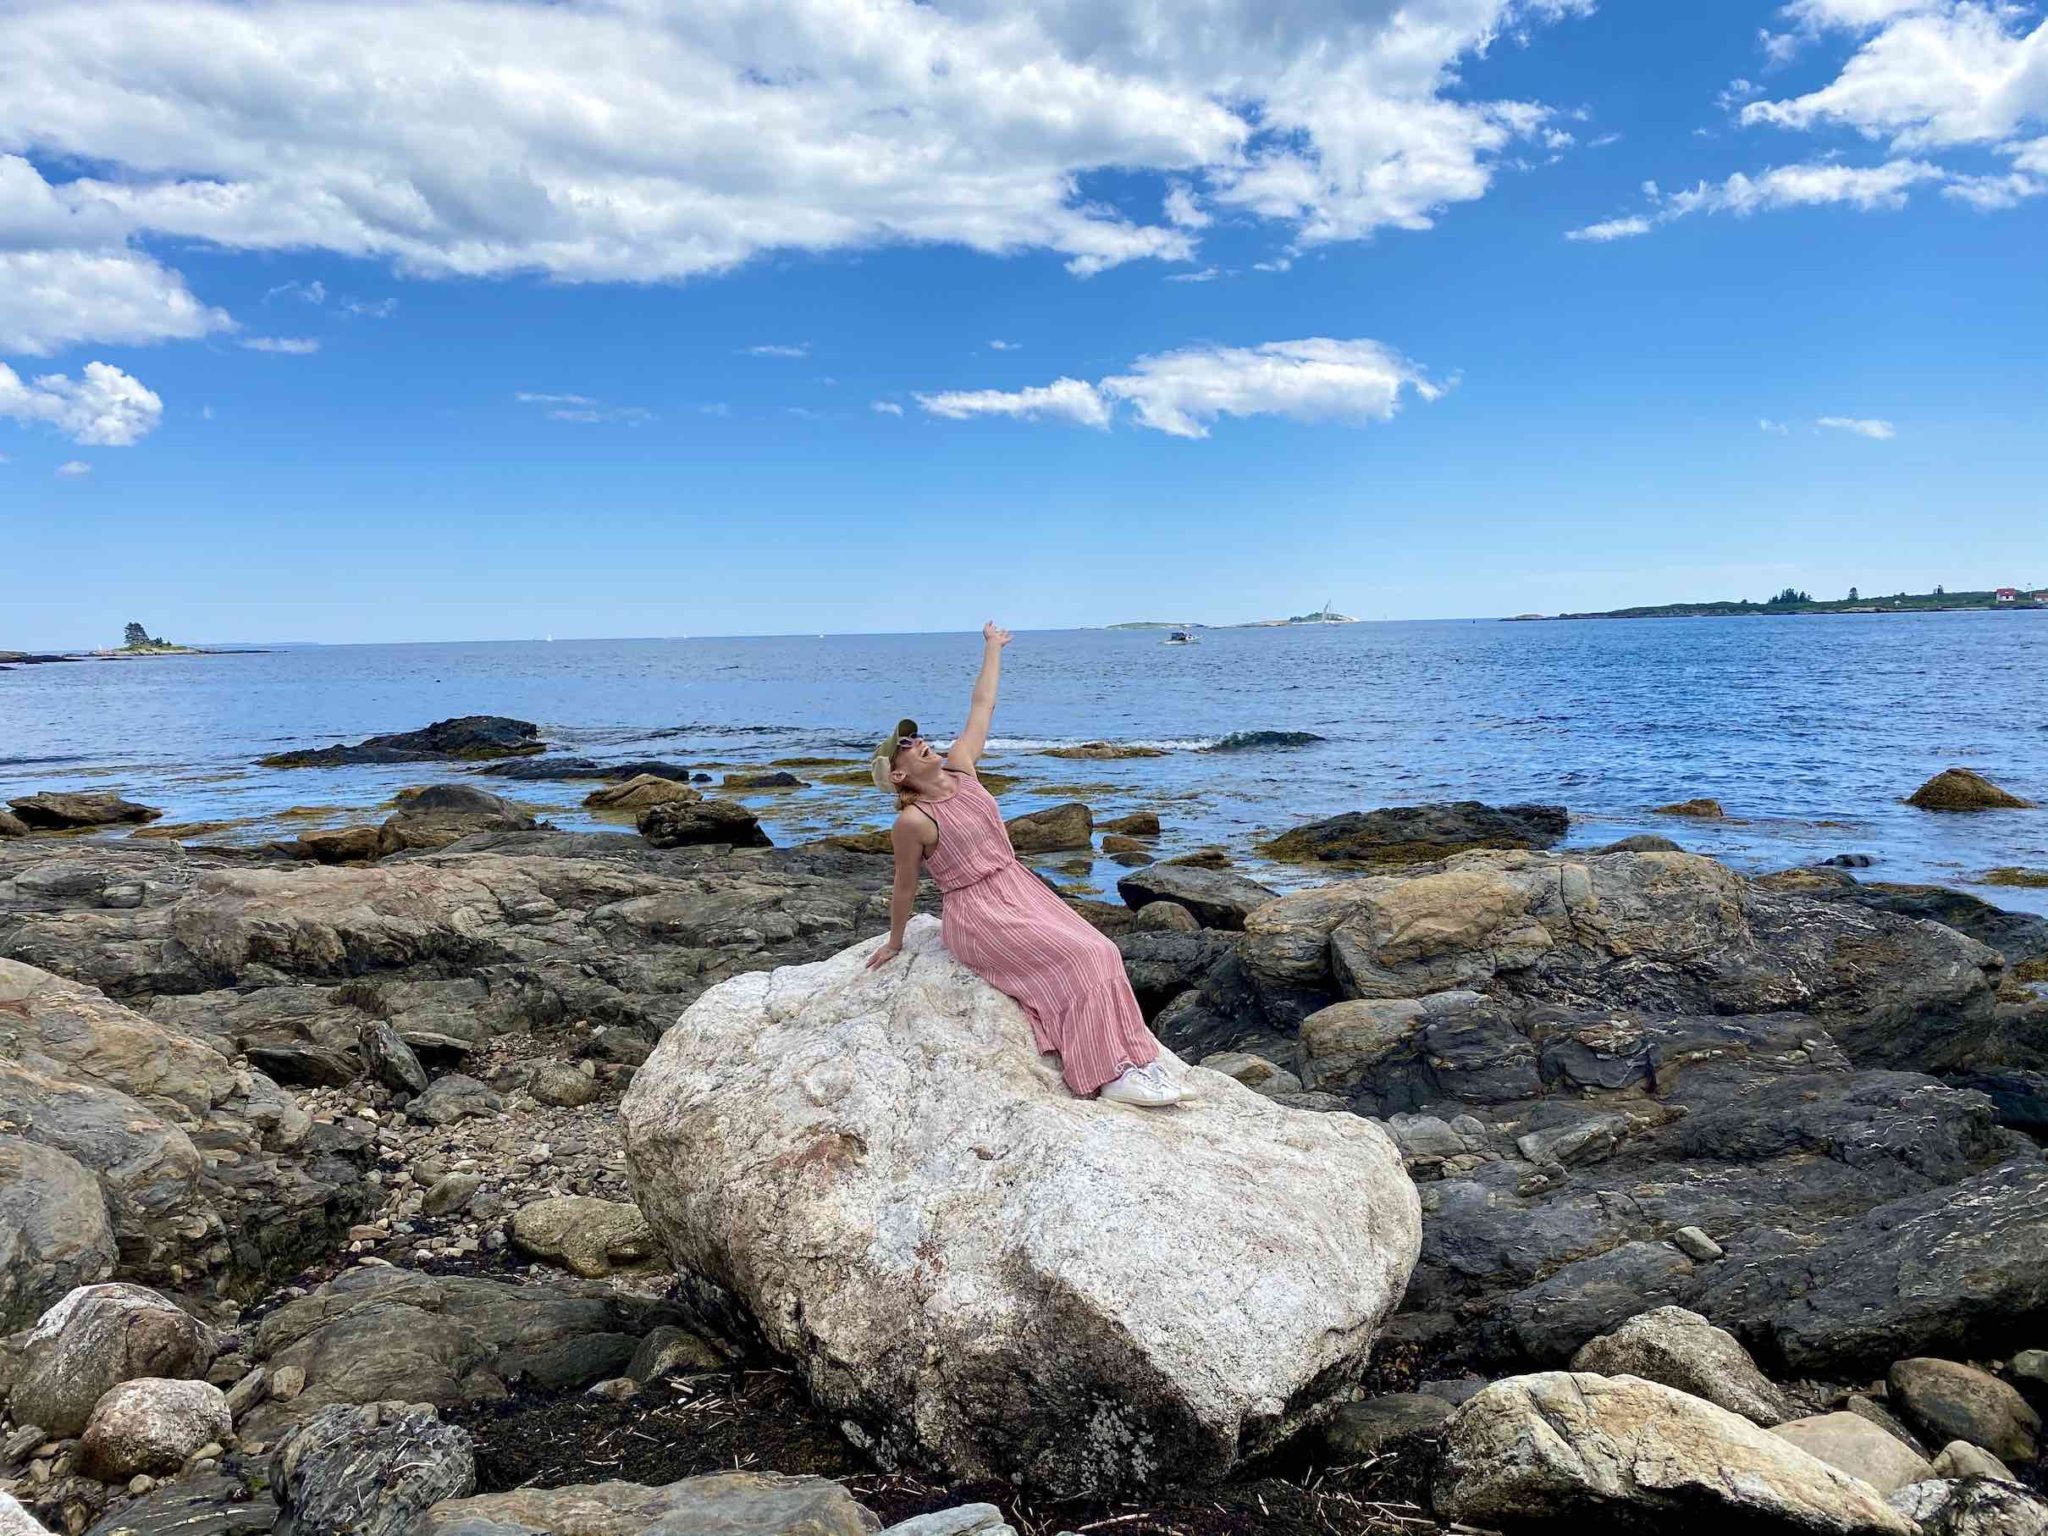 merry-on-the-rocks-at-oceanpoint-in-boothbay-harbor-mid-coast-maine